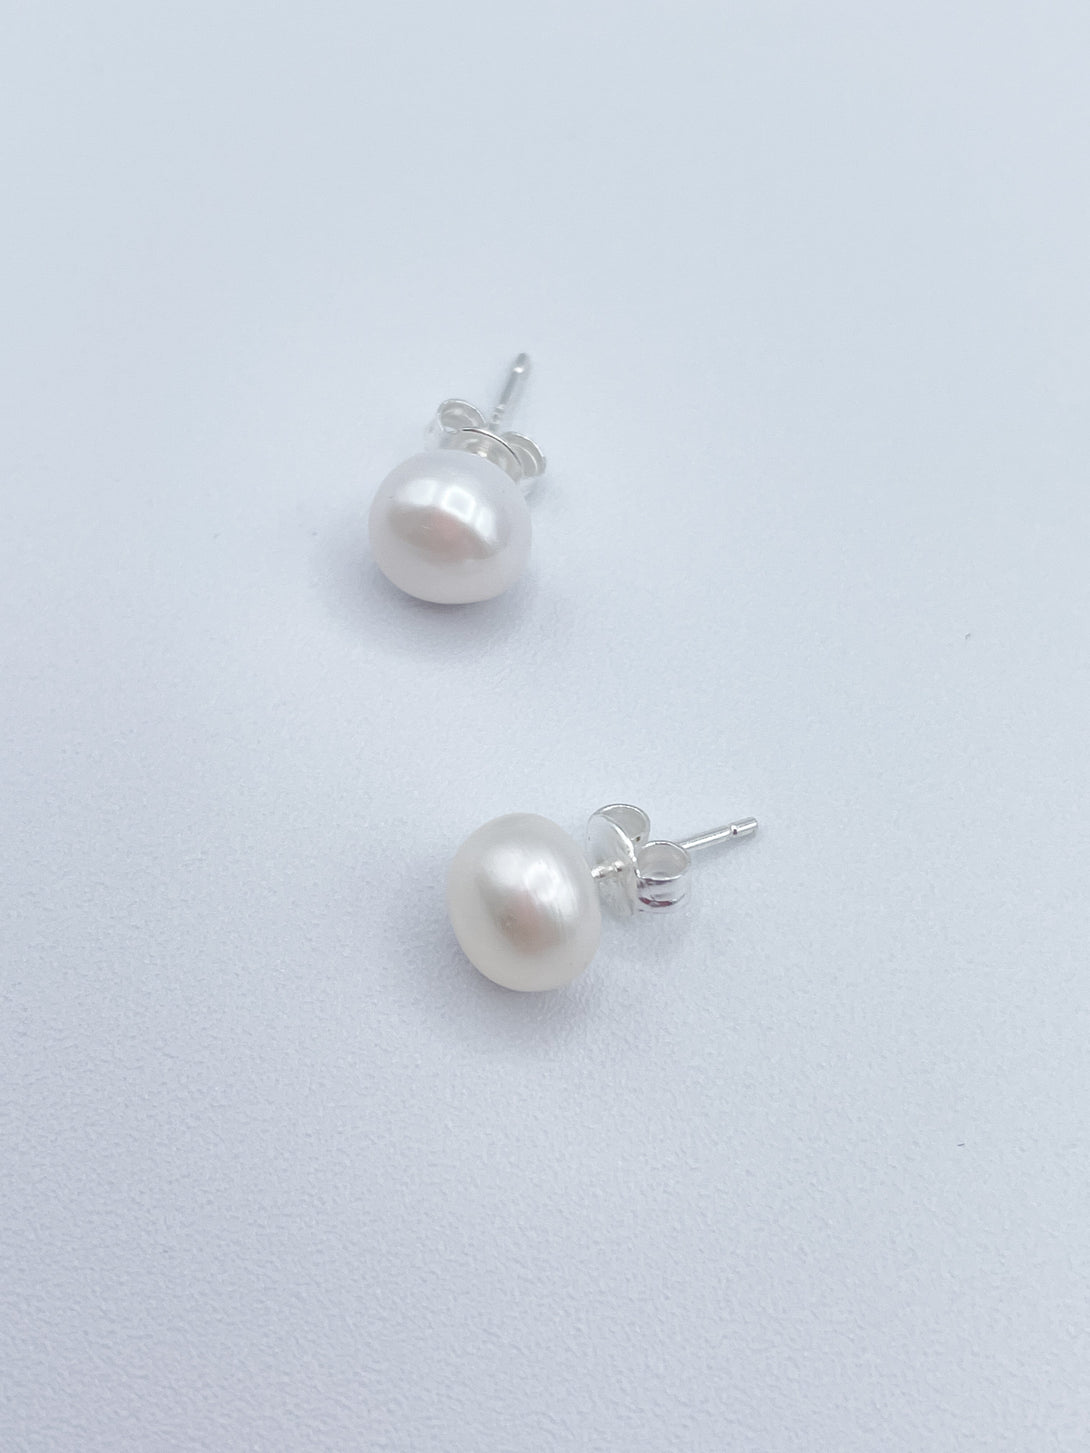 Women's 8mm Pearl Stud Earrings Available in White or Black Pearl